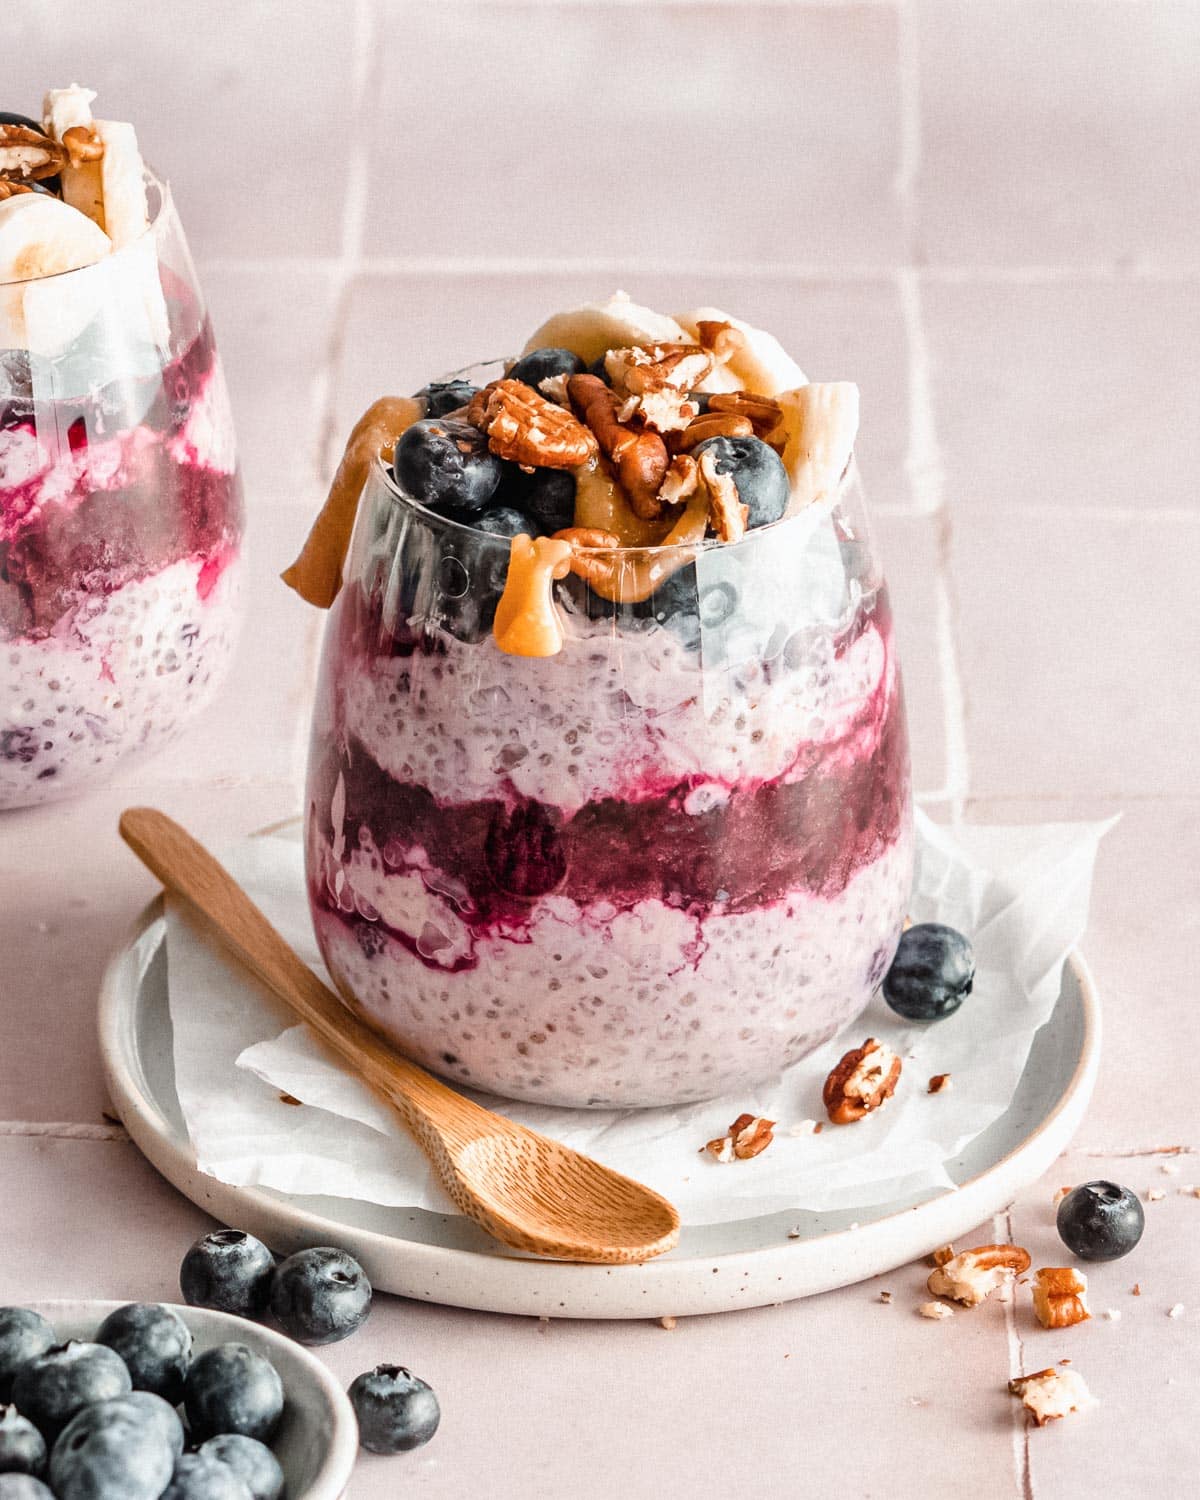 overnight oats with frozen blueberries in a glass, in the middle one layer of mashed blueberries and topped with fresh blueberries, banana, nuts and caramel sauce.